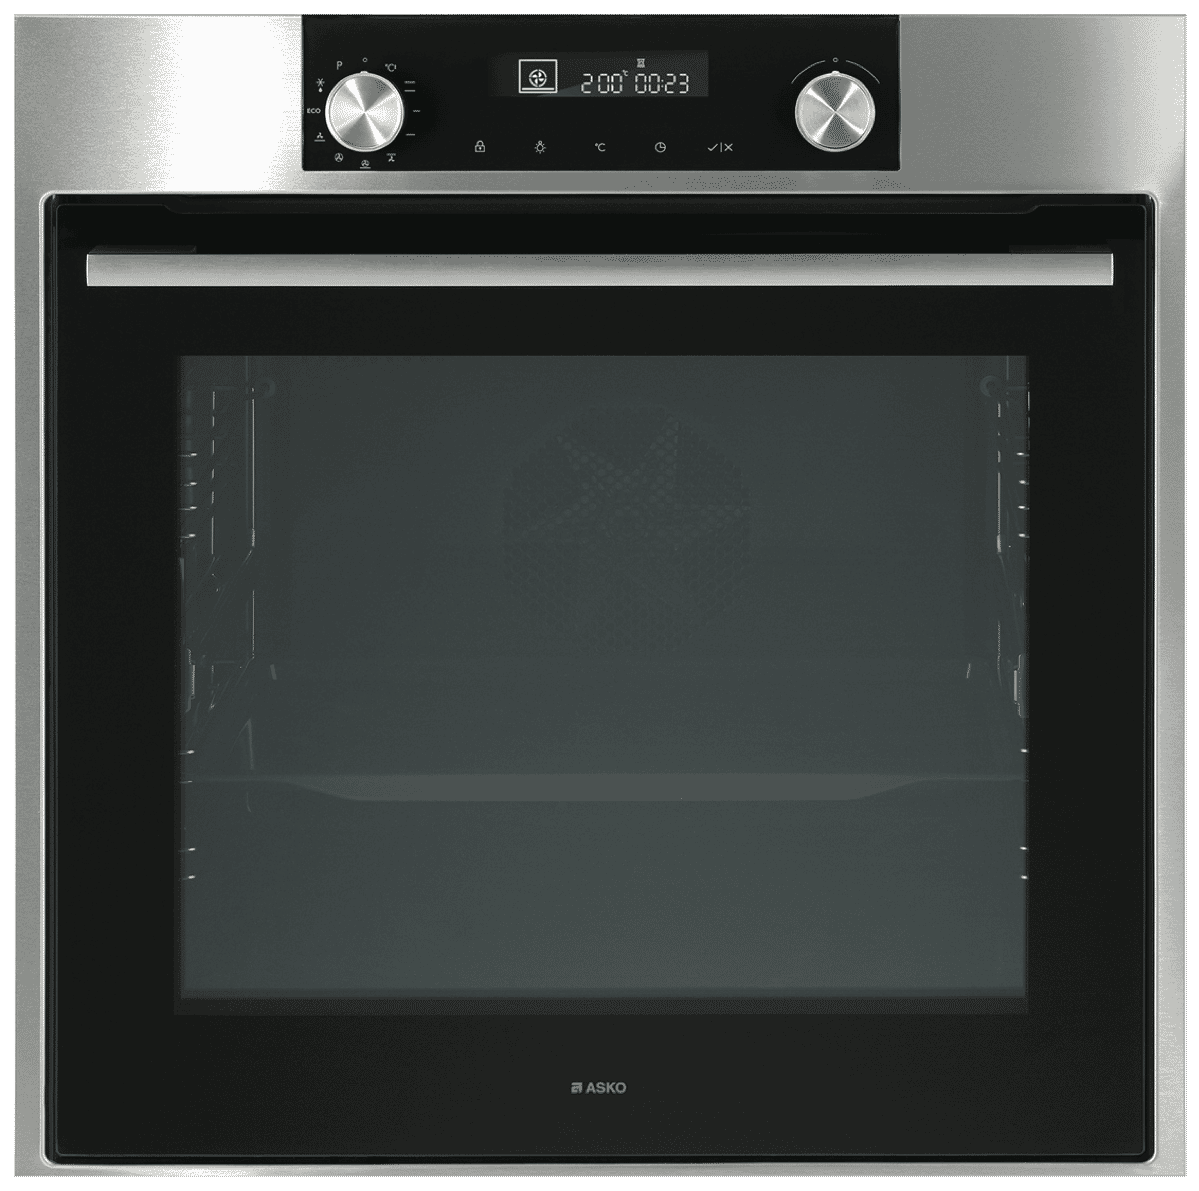 ASKO OP8637S 60cm Pyrolytic Oven - Stainless Steel at The Good Guys